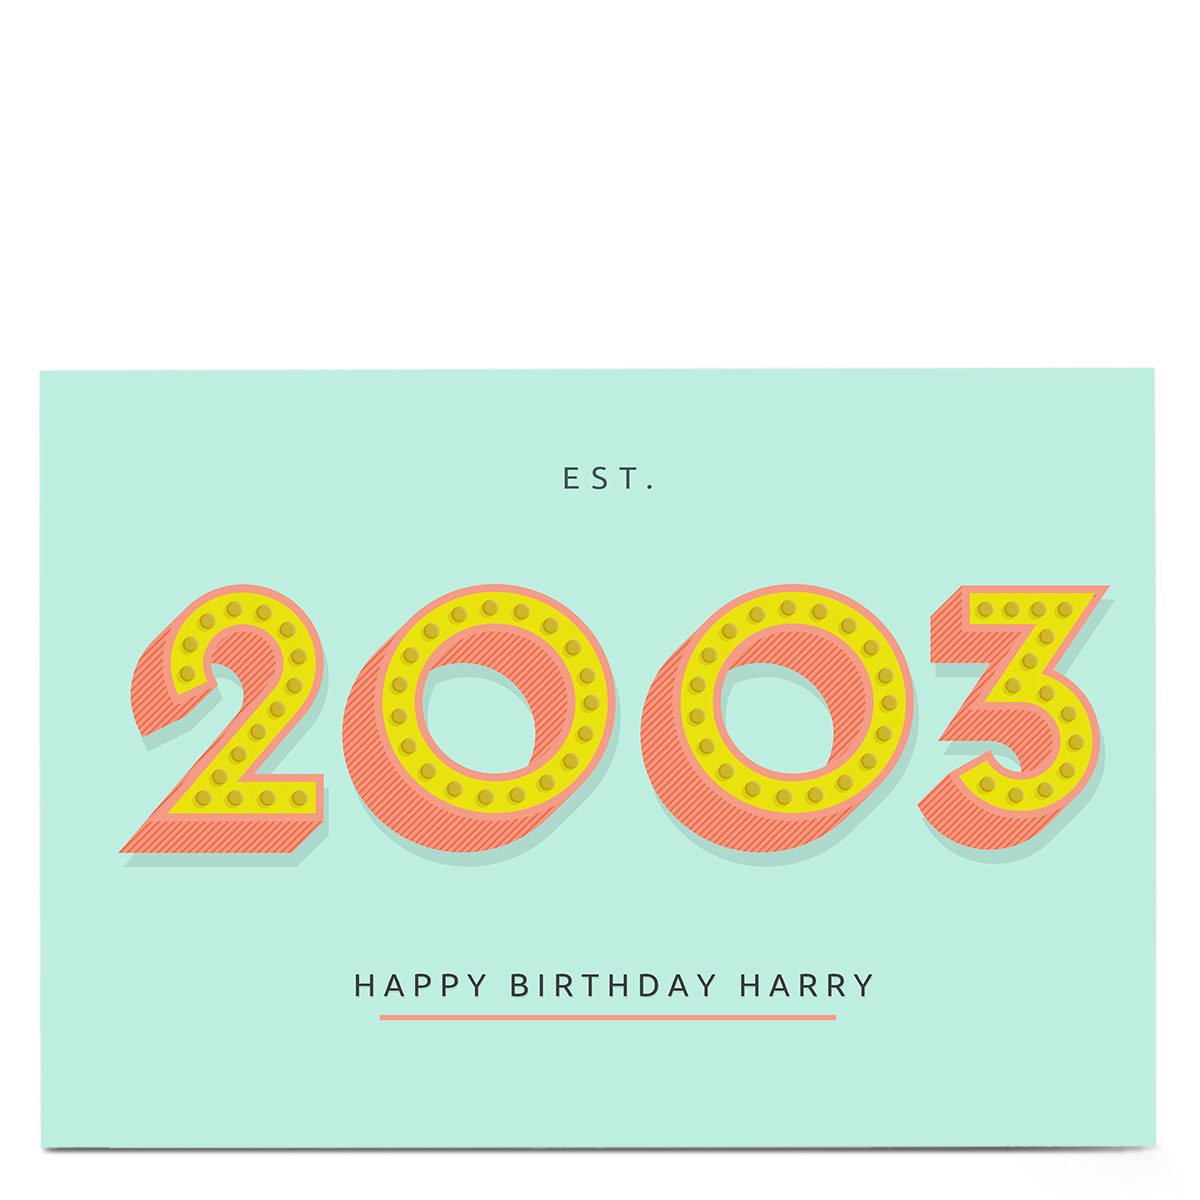 Personalised Birthday Card - Est. Any Year